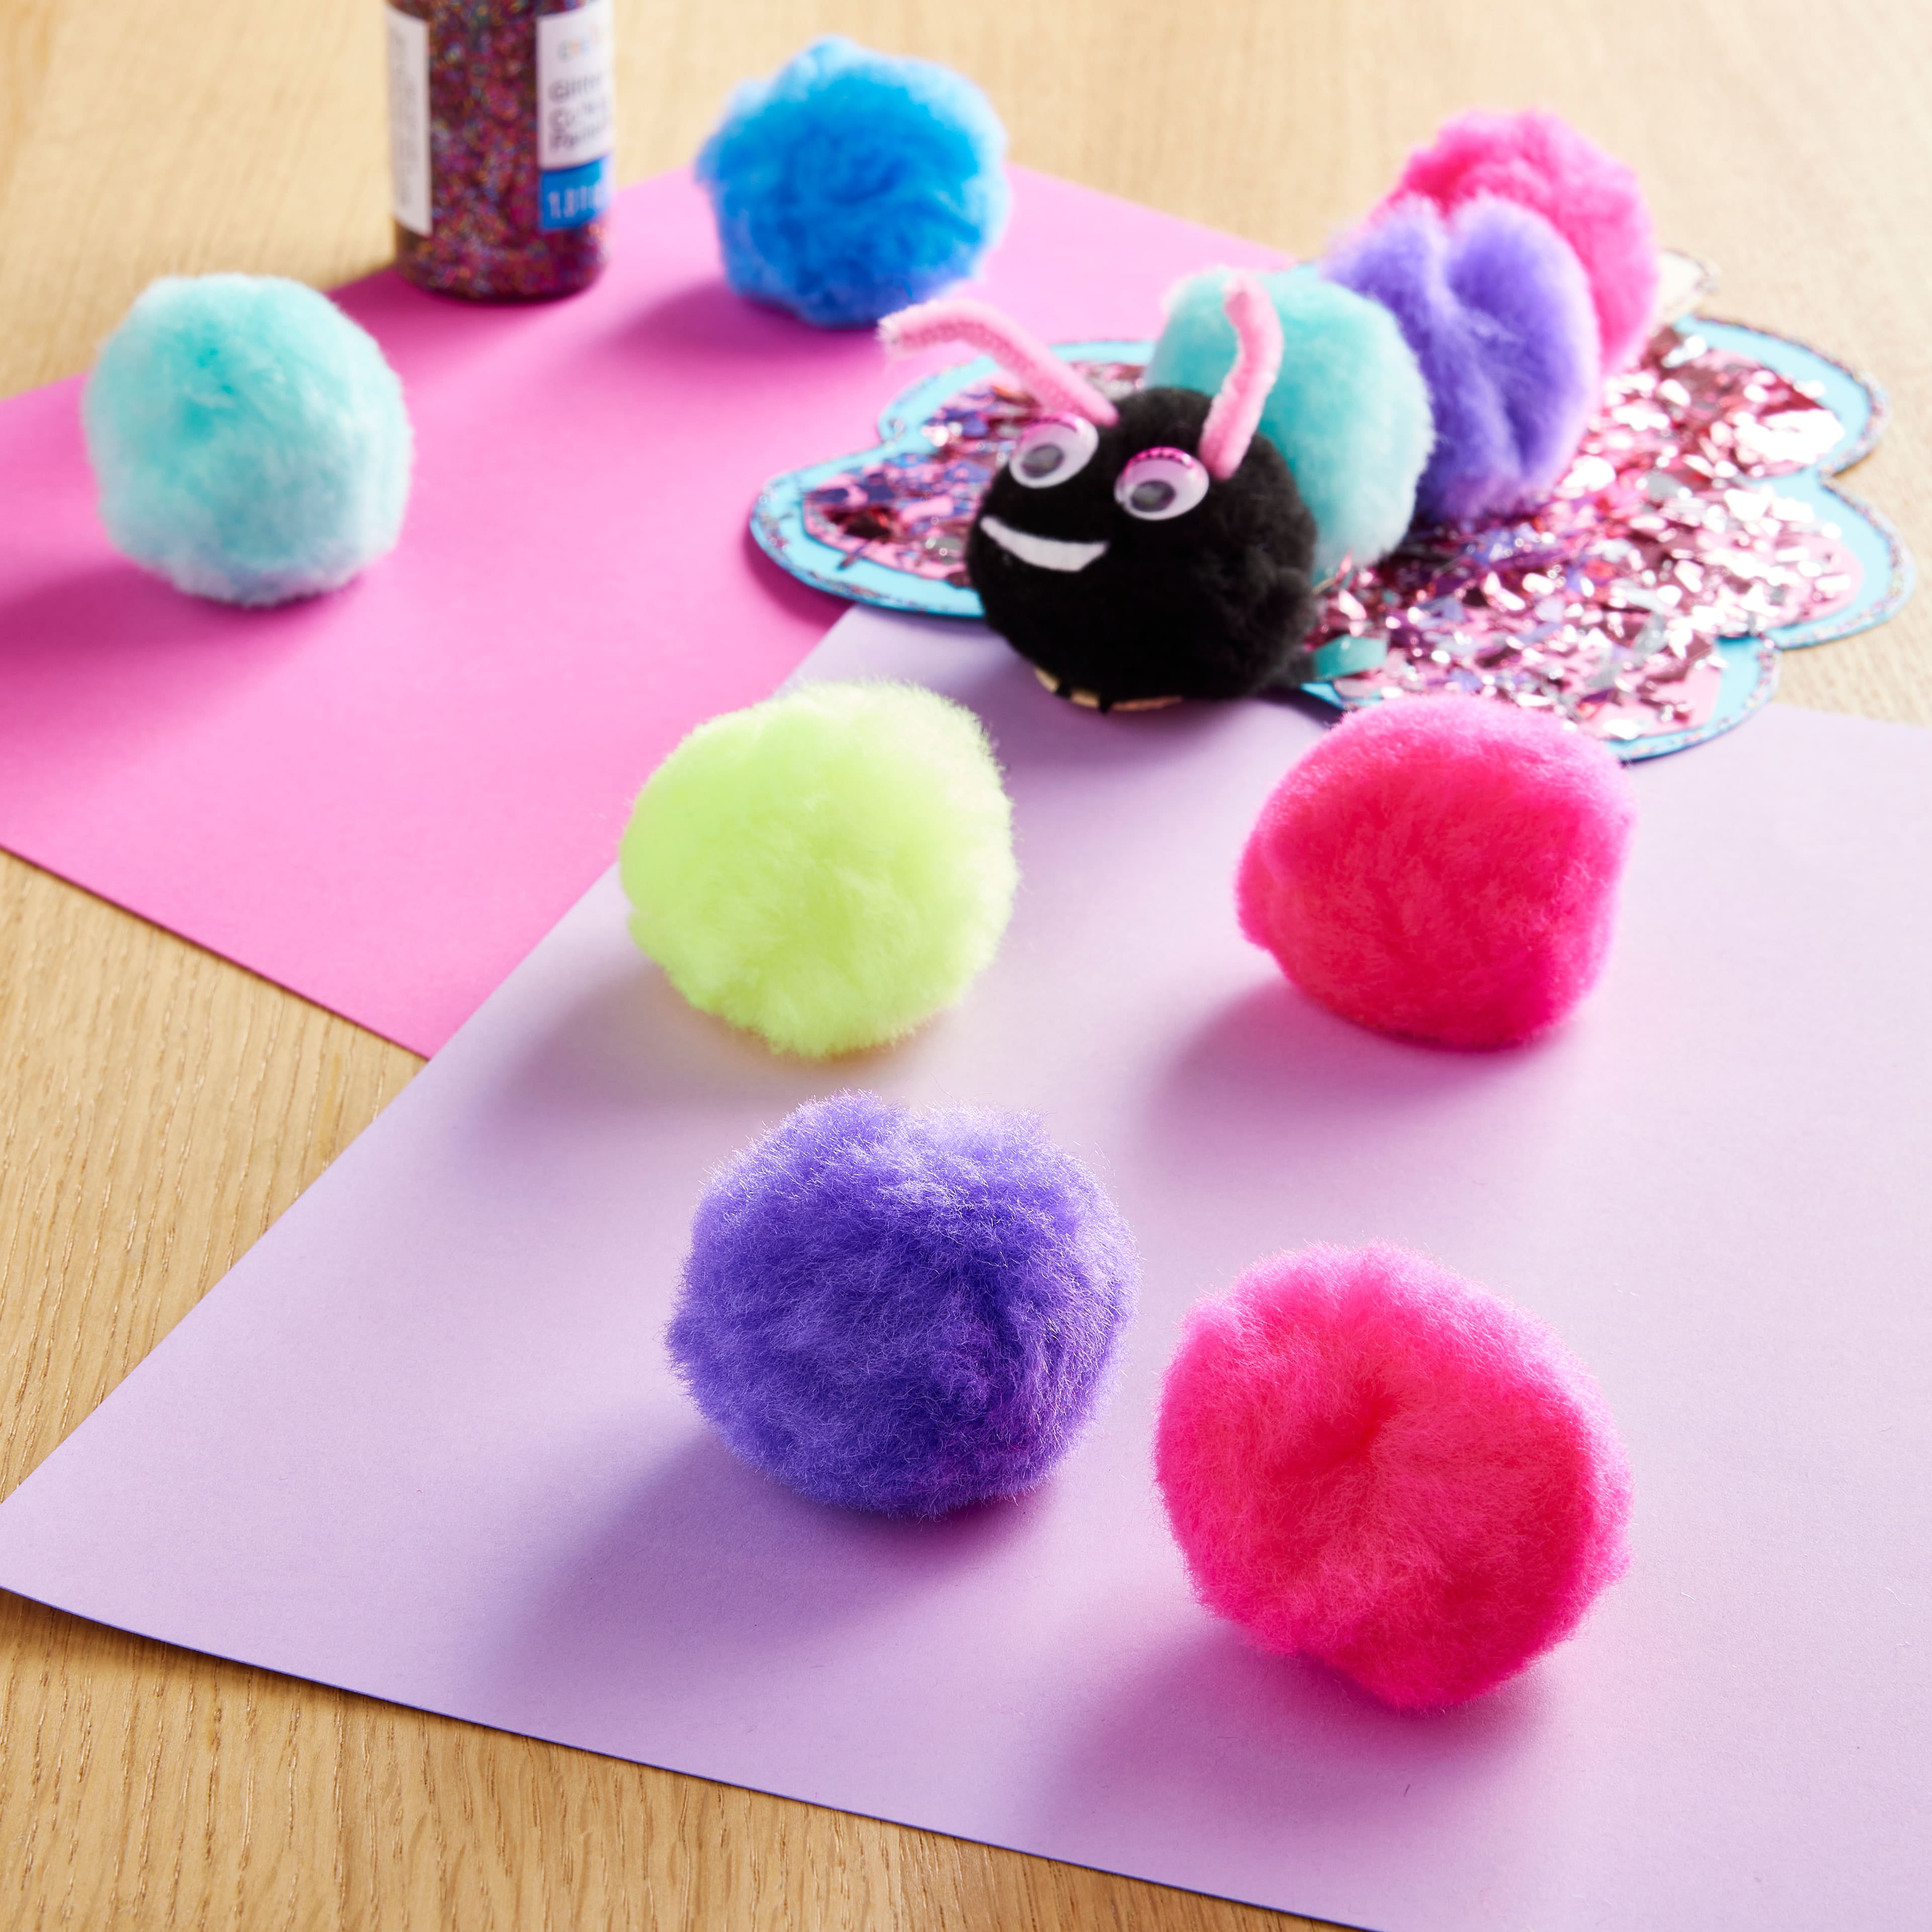 Pom Poms Bright Variety of Colors, 0.50 to 2 Inch, Value Pack of